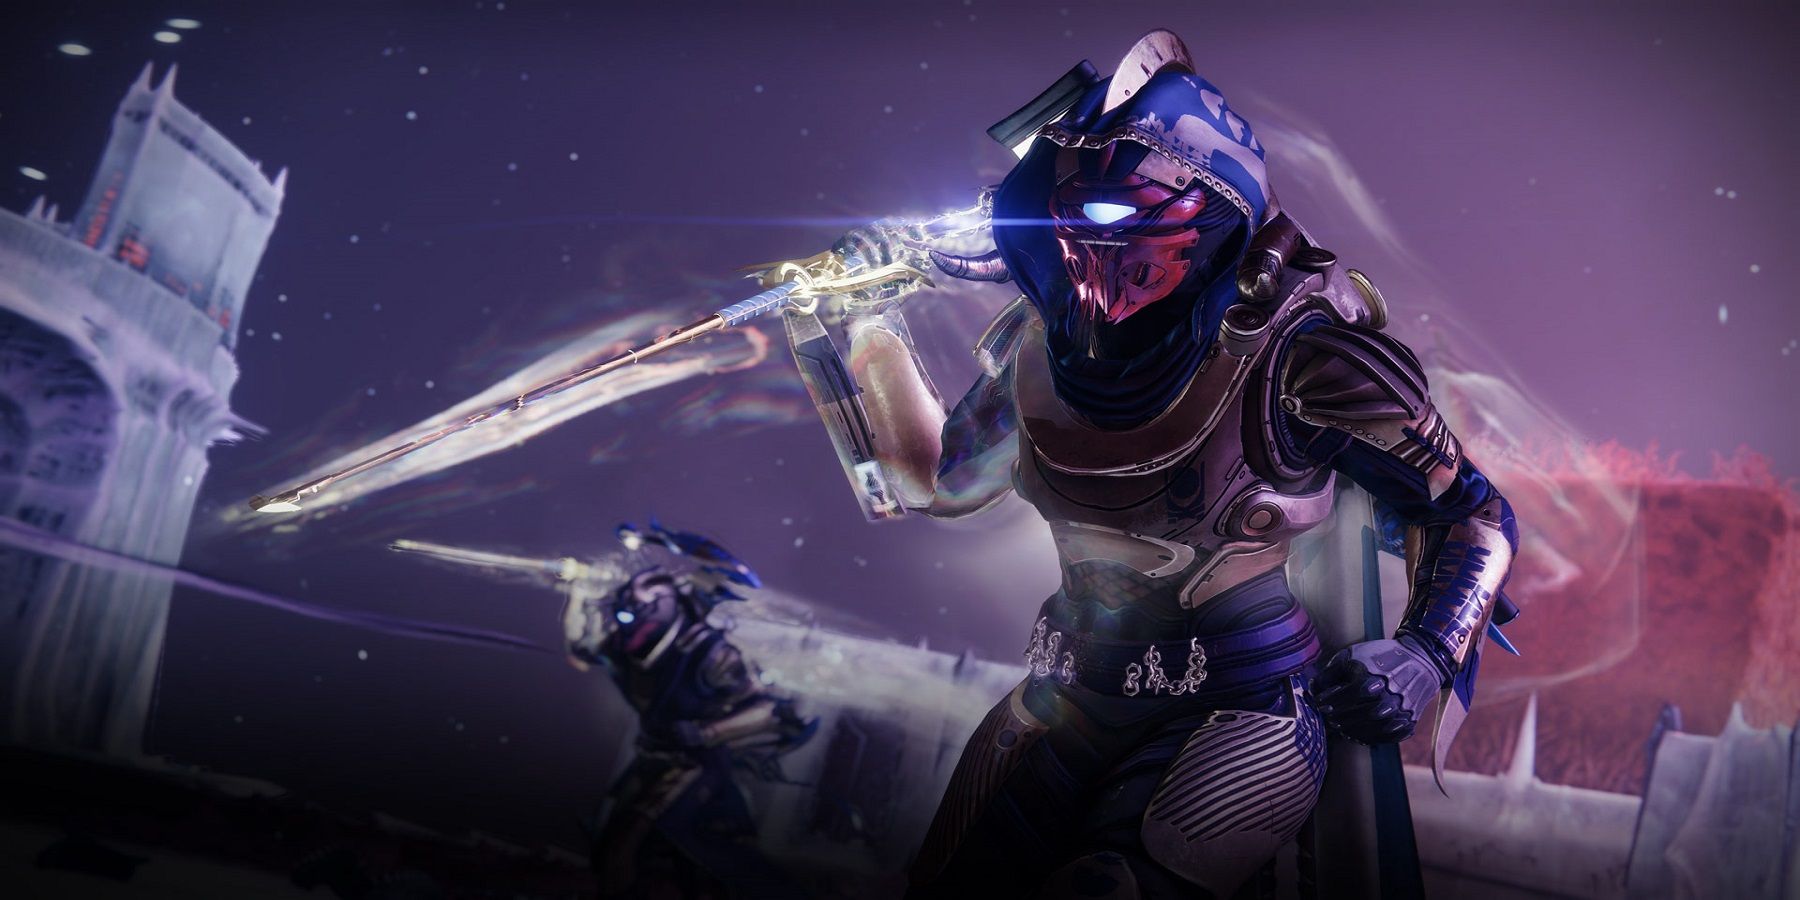 Bungie addresses the current, seemingly low drop rate for deepsight weapons in Destiny 2 The Witch Queen's Wellspring activity.